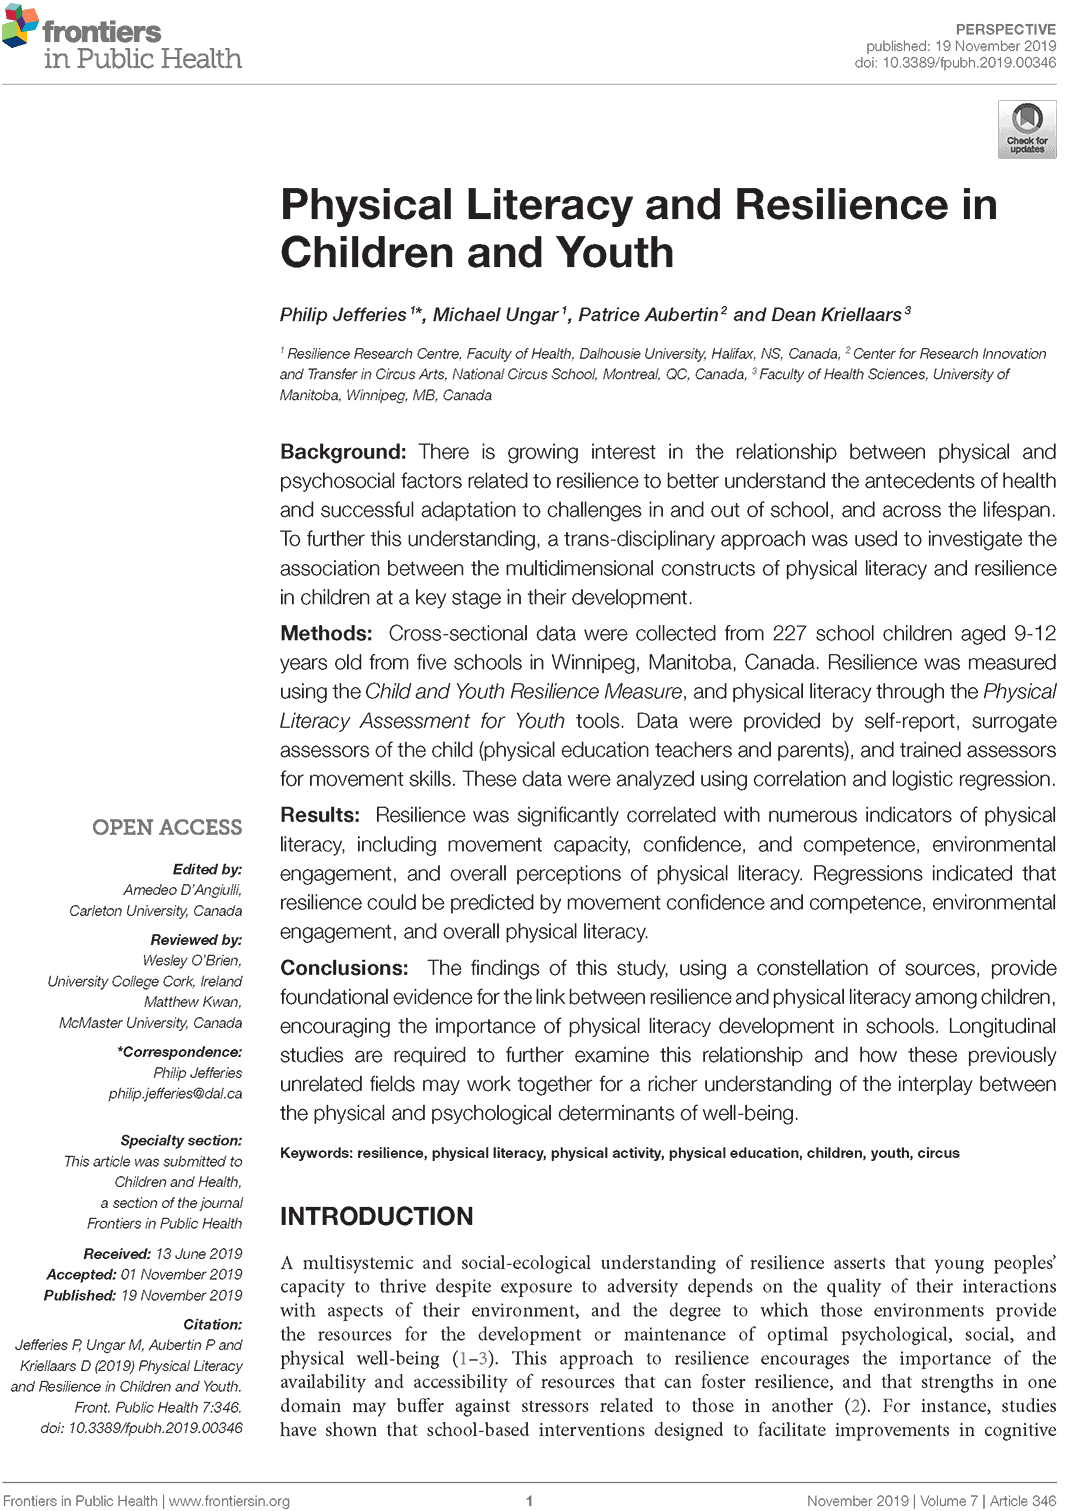 Physical Literacy and Resilience in Children and Youth